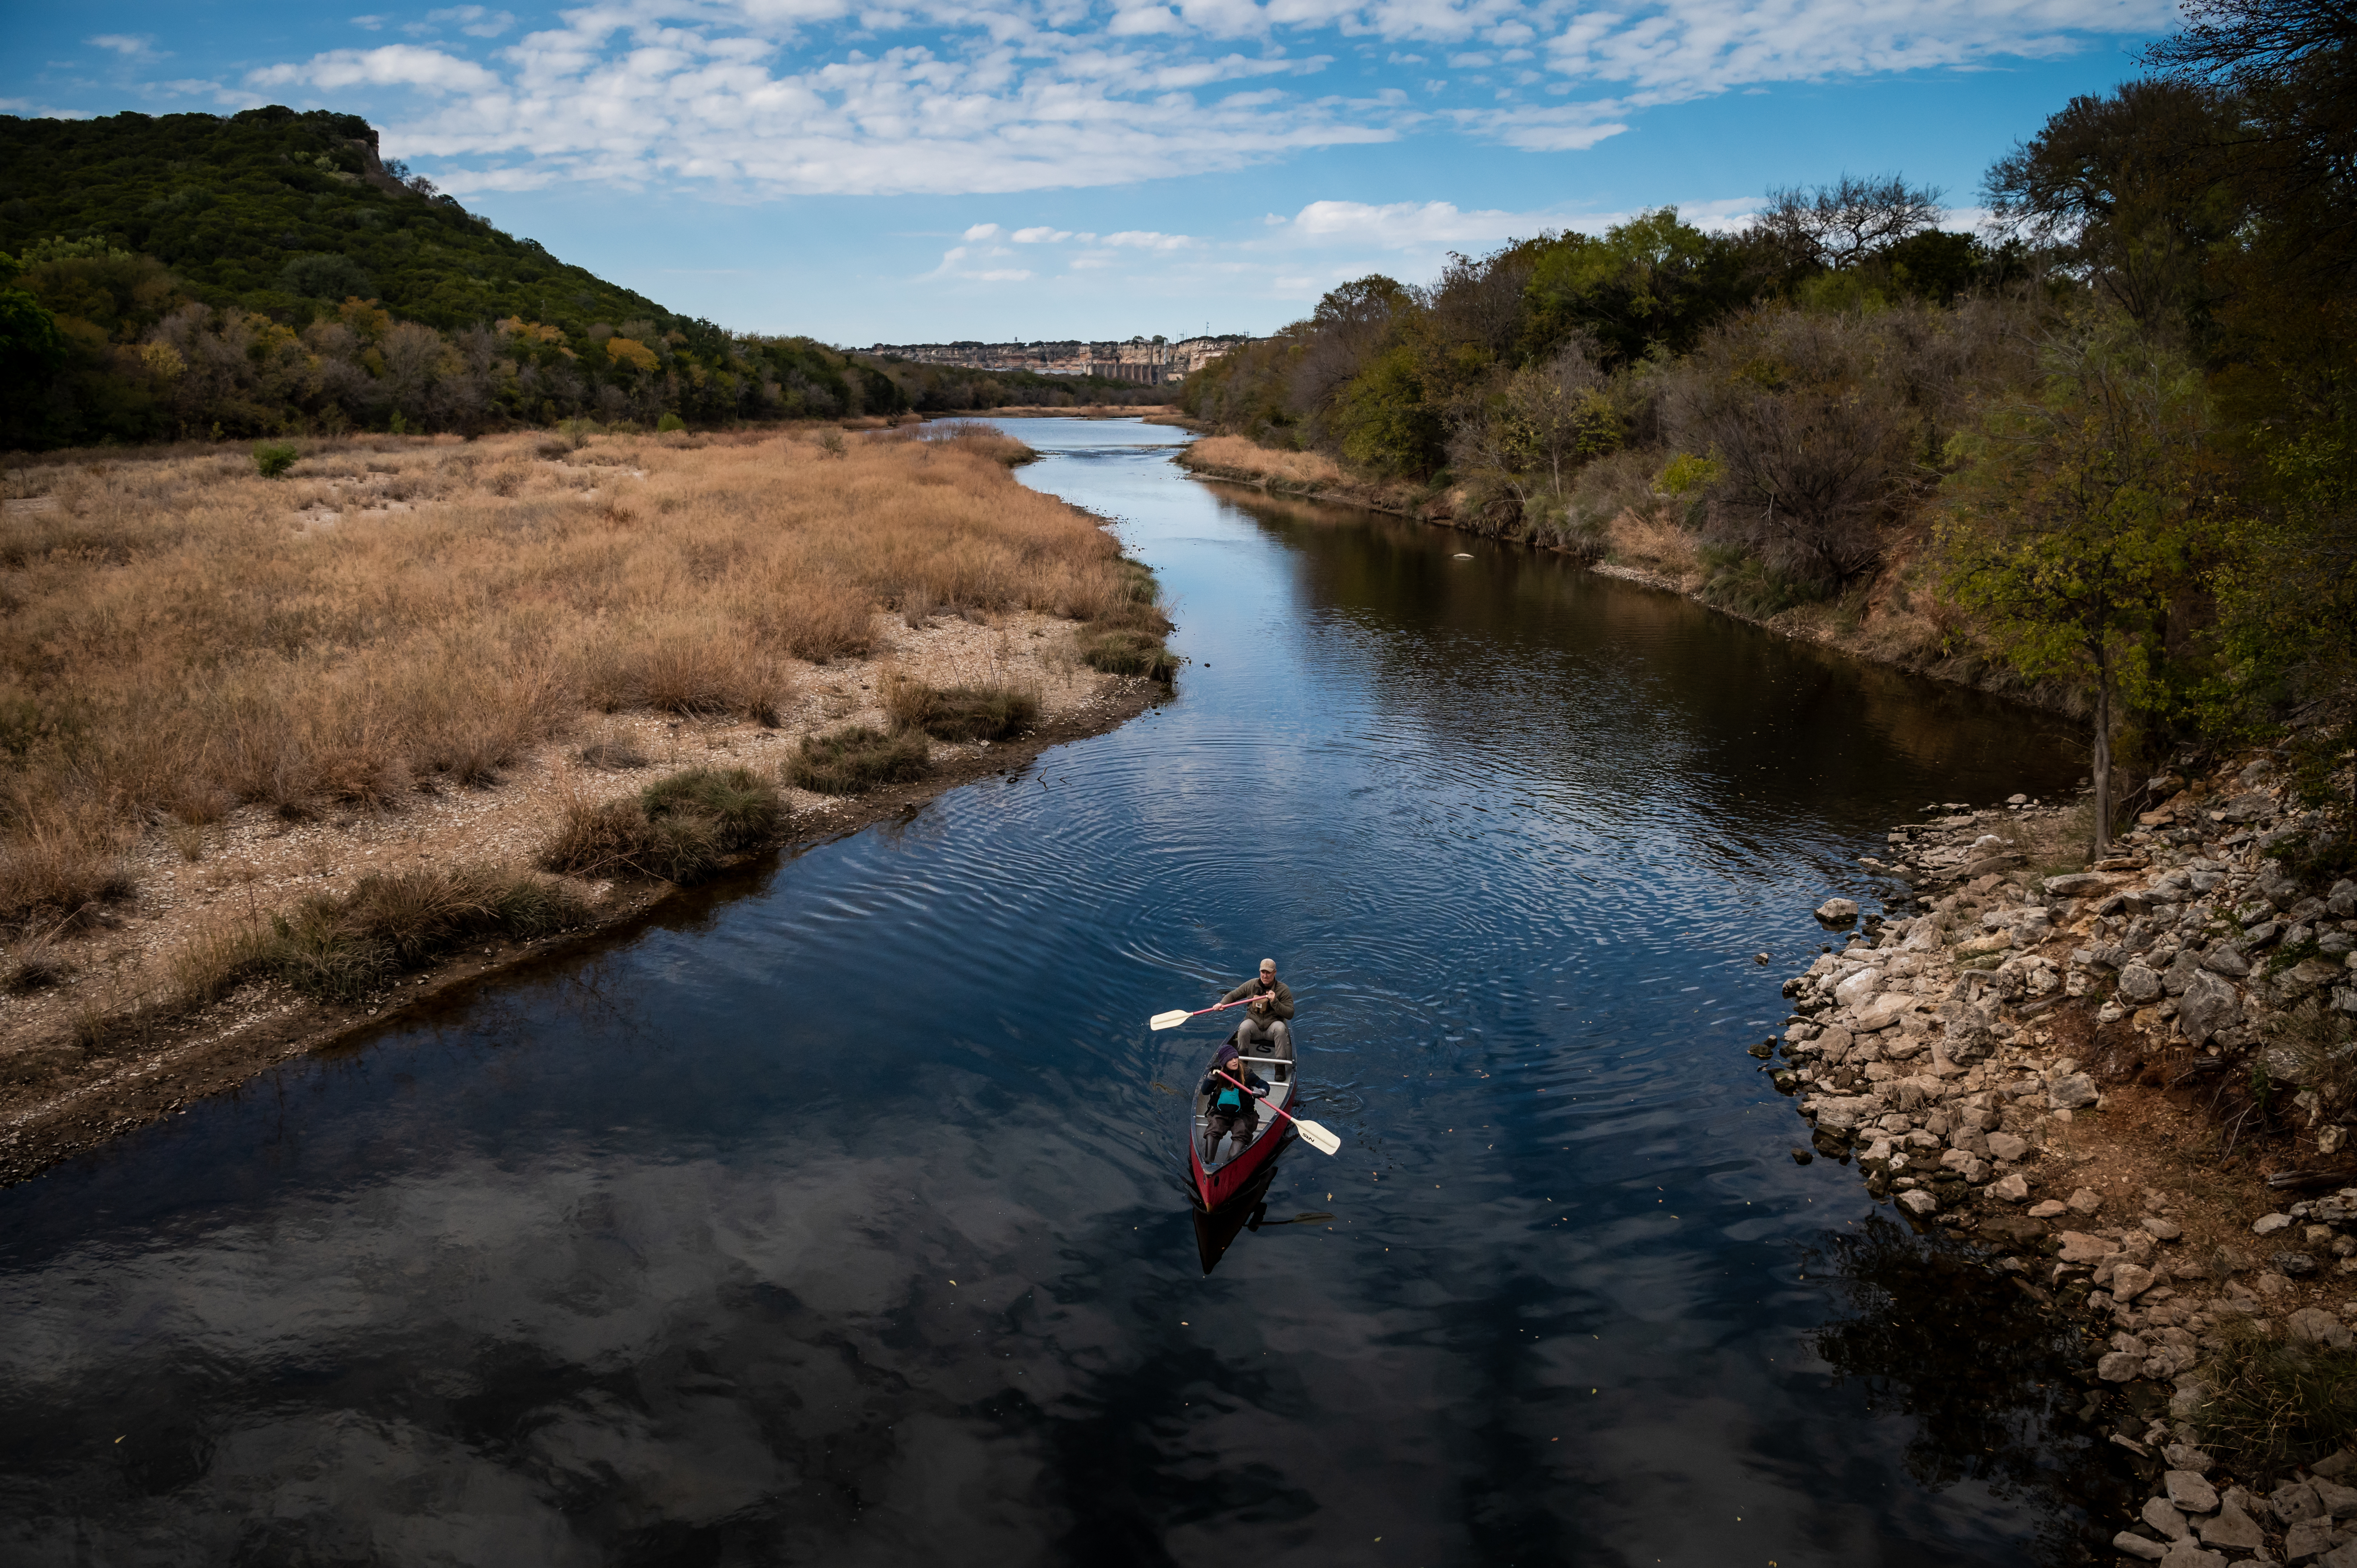 A canoe floats down the Brazos River under a big partly cloudy blue sky, with two people rowing it. The shore, covered with rocky scrub and low forested hills borders the river.